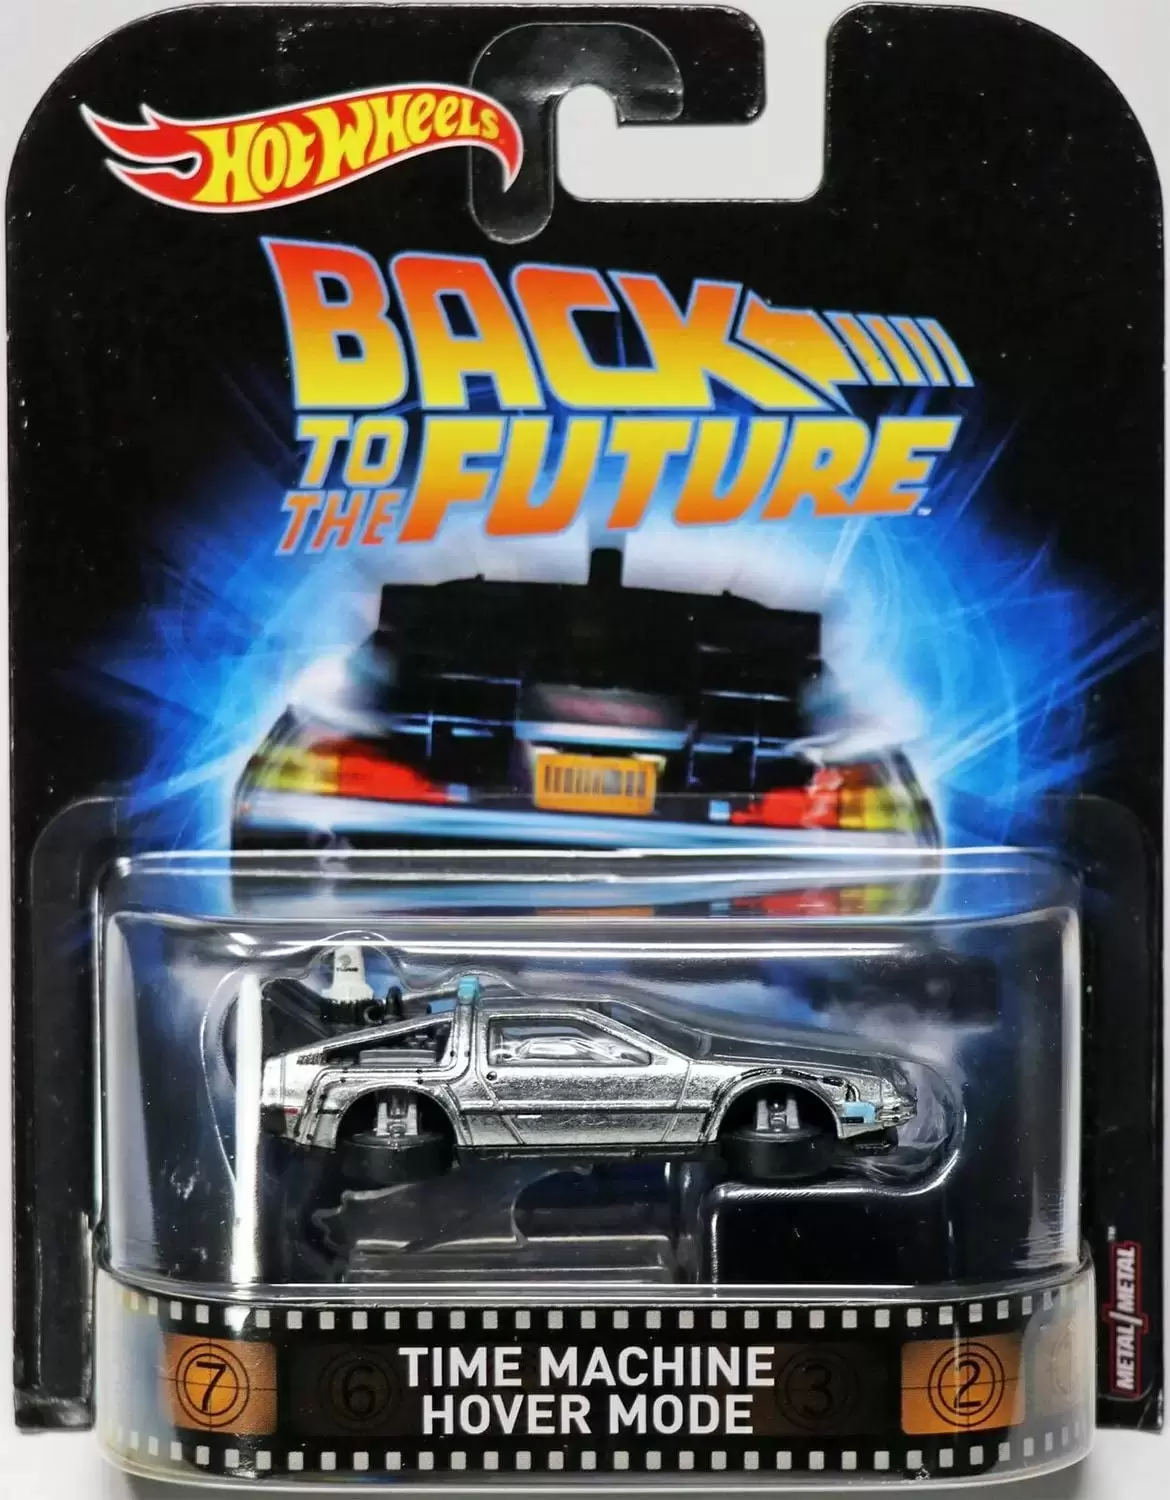 Retro Entertainment Hot Wheels - Back to the Future - Time Machine Hover Mode